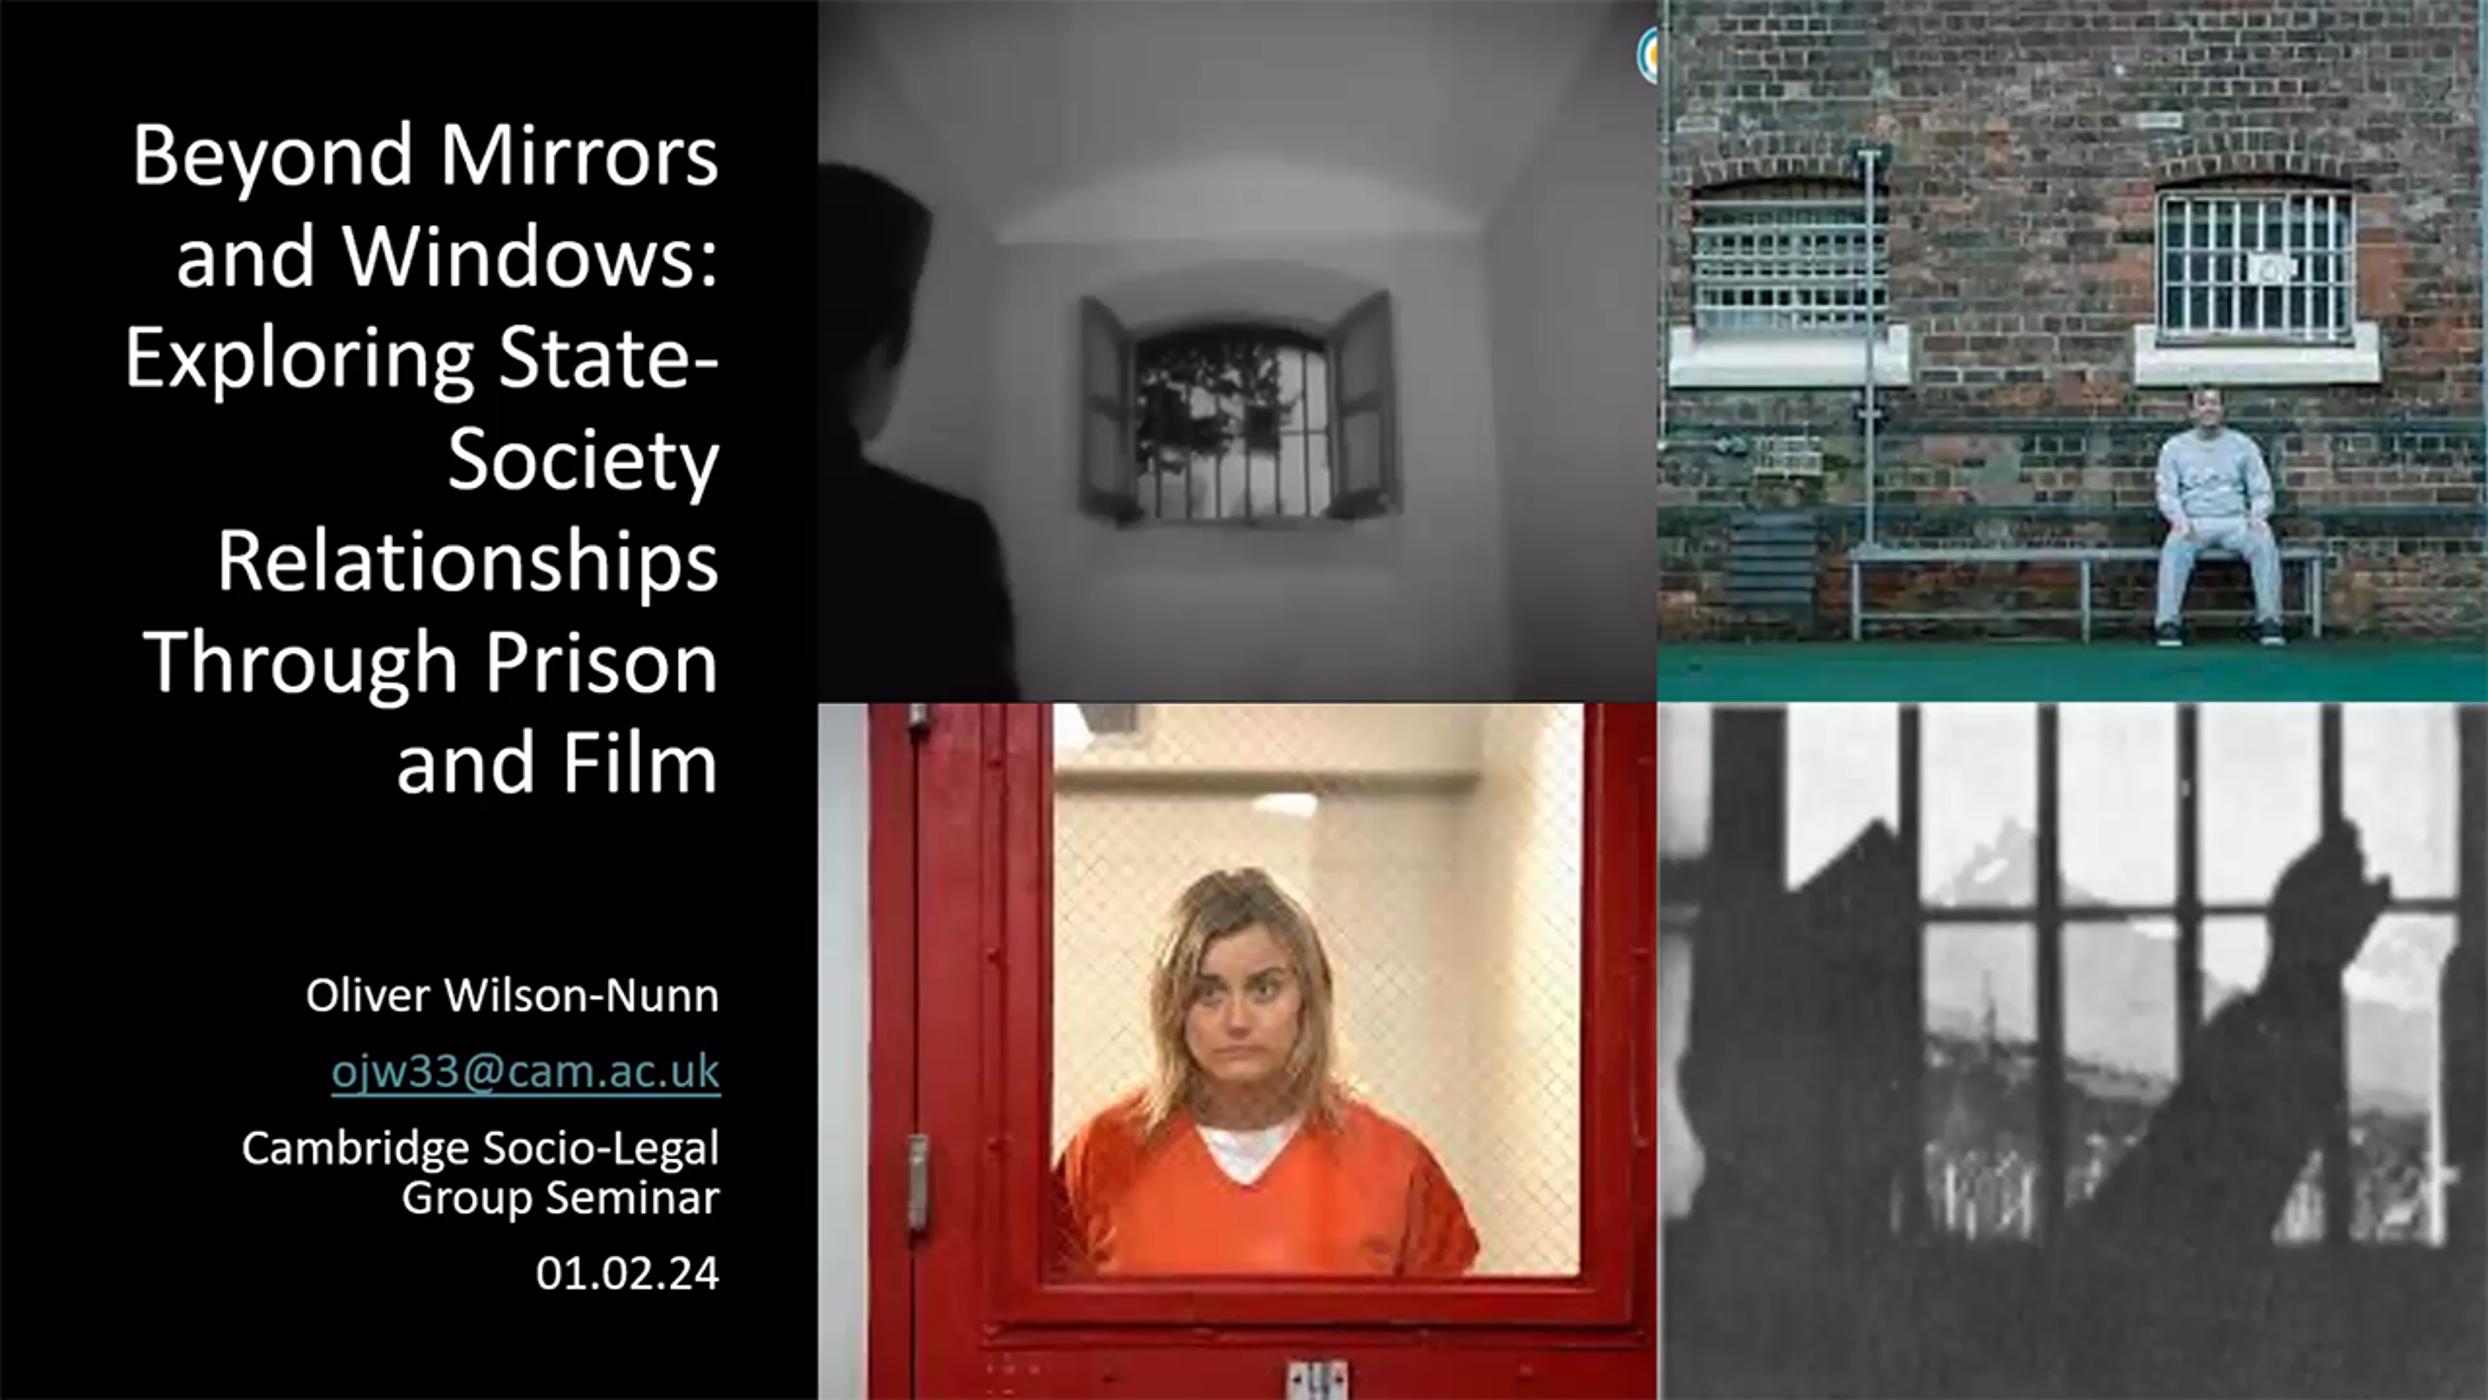 'Beyond Mirrors and Windows: Exploring State-Society Relationships Through Prison and Film': CSLG seminar